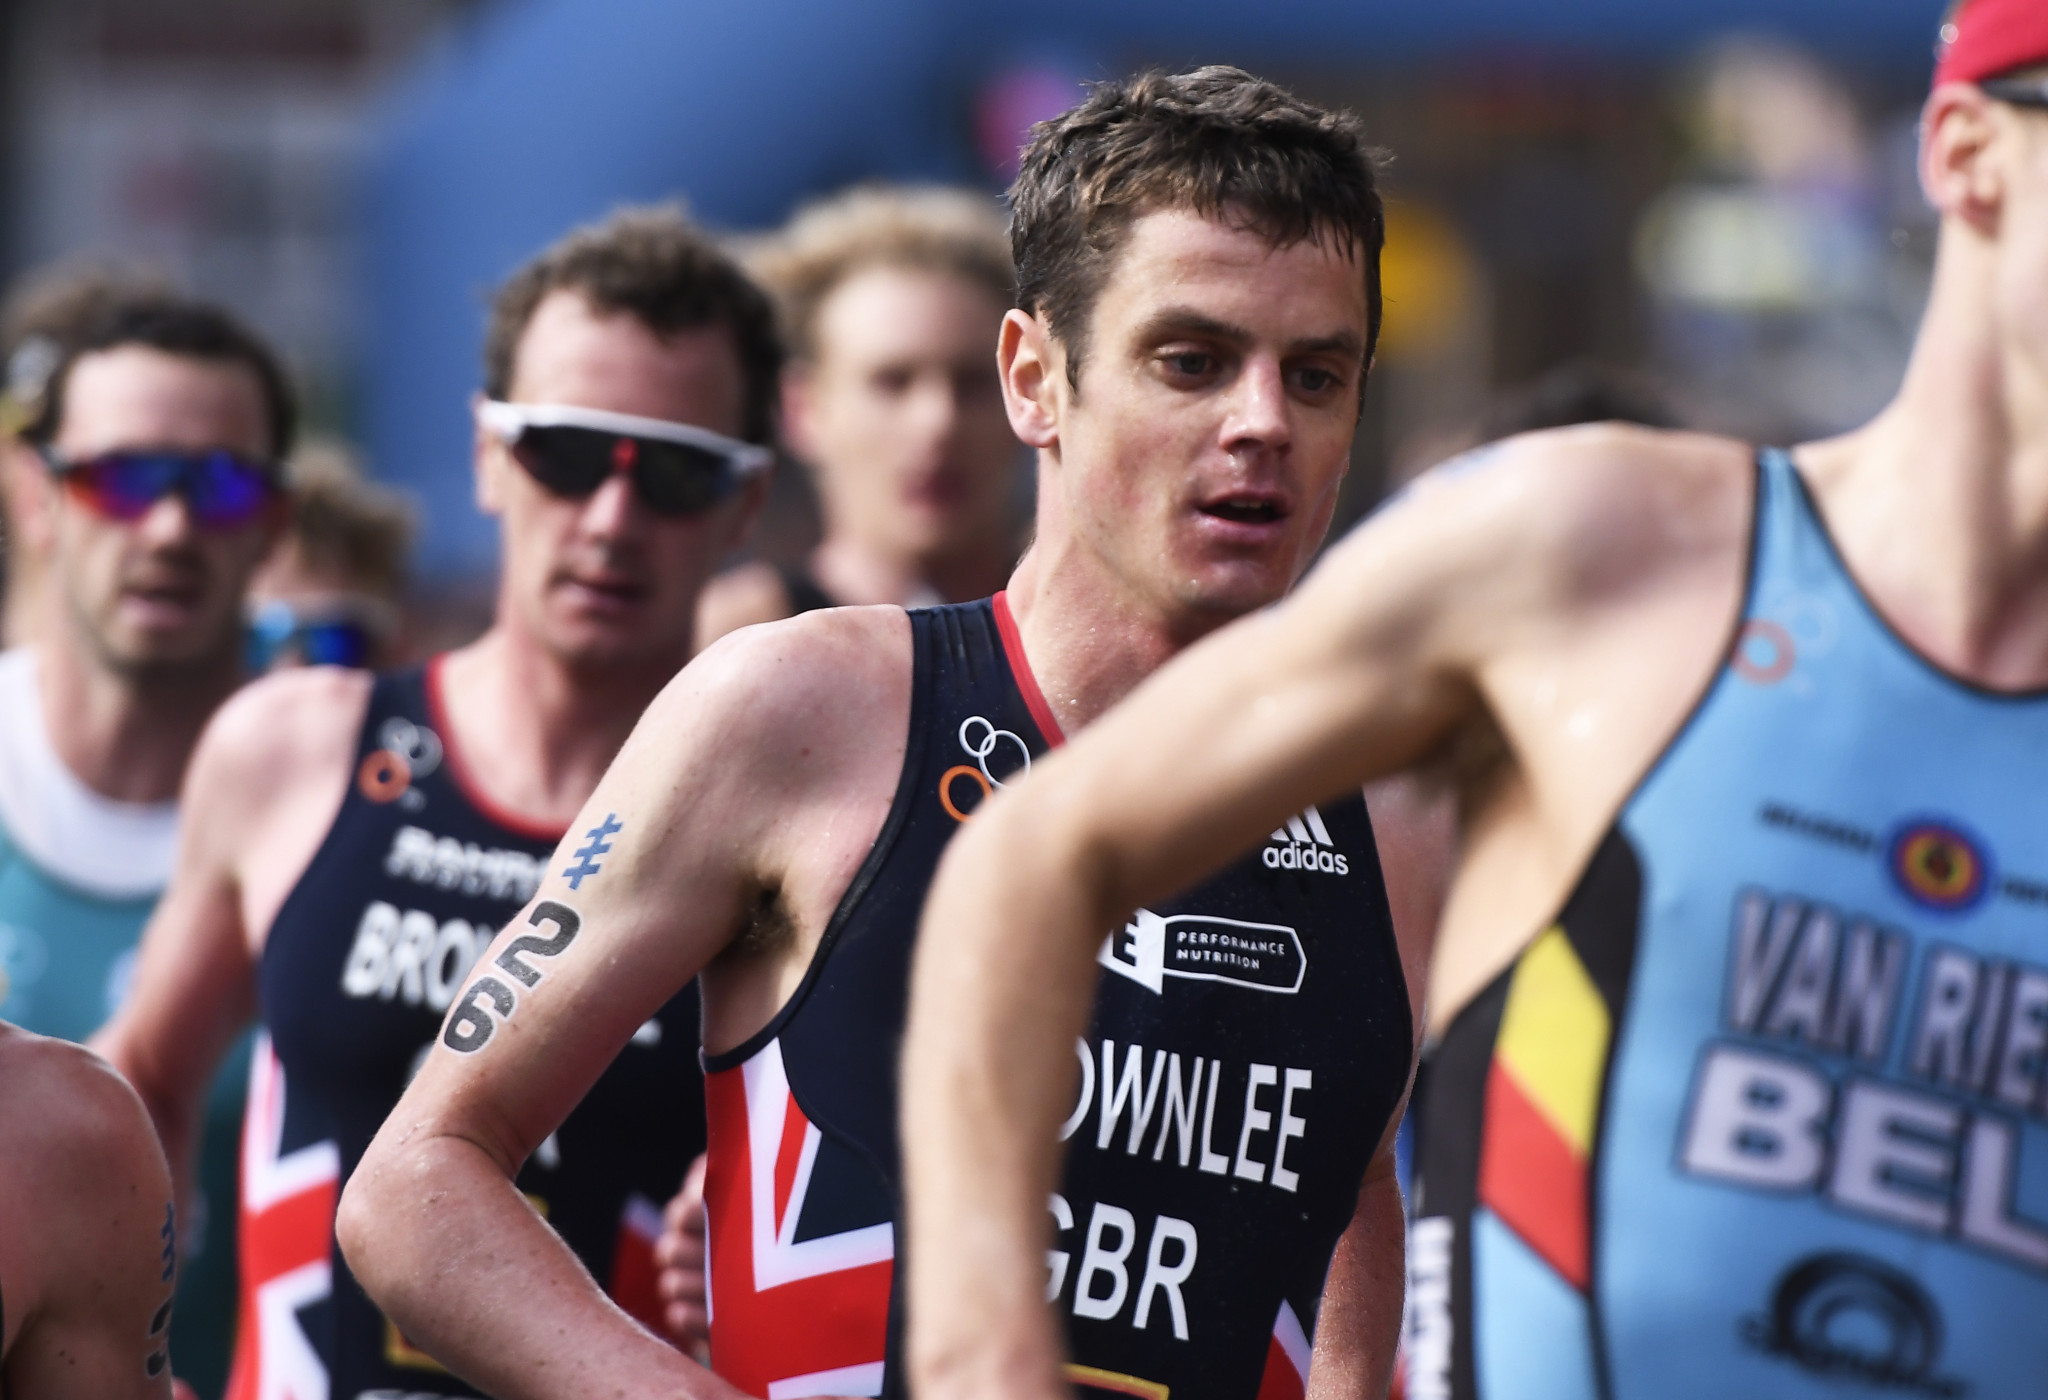 Jonny Brownlee and his brother Alistair will not be present at Paris 2024 for the Team GB triathlon team. GETTY IMAGES